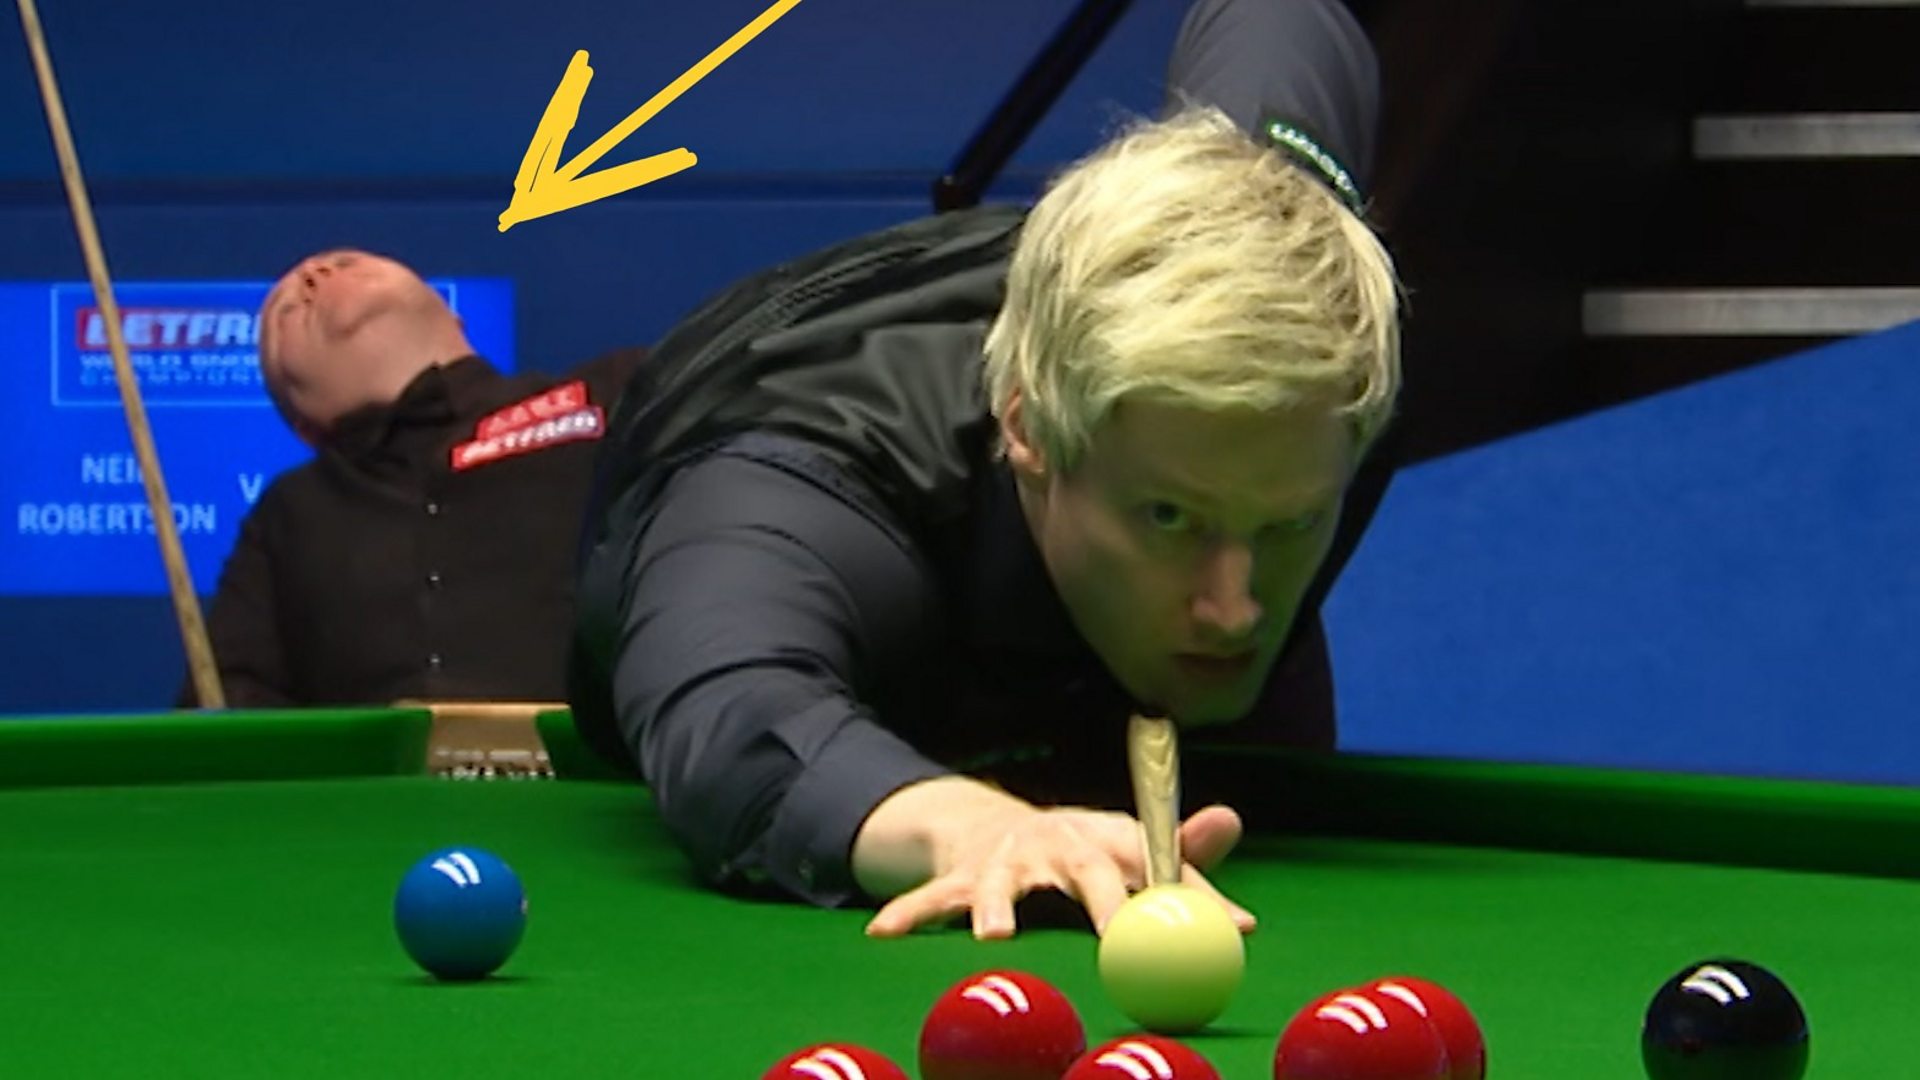 World Snooker Social media thought John Higgins had died mid-match at the Crucible